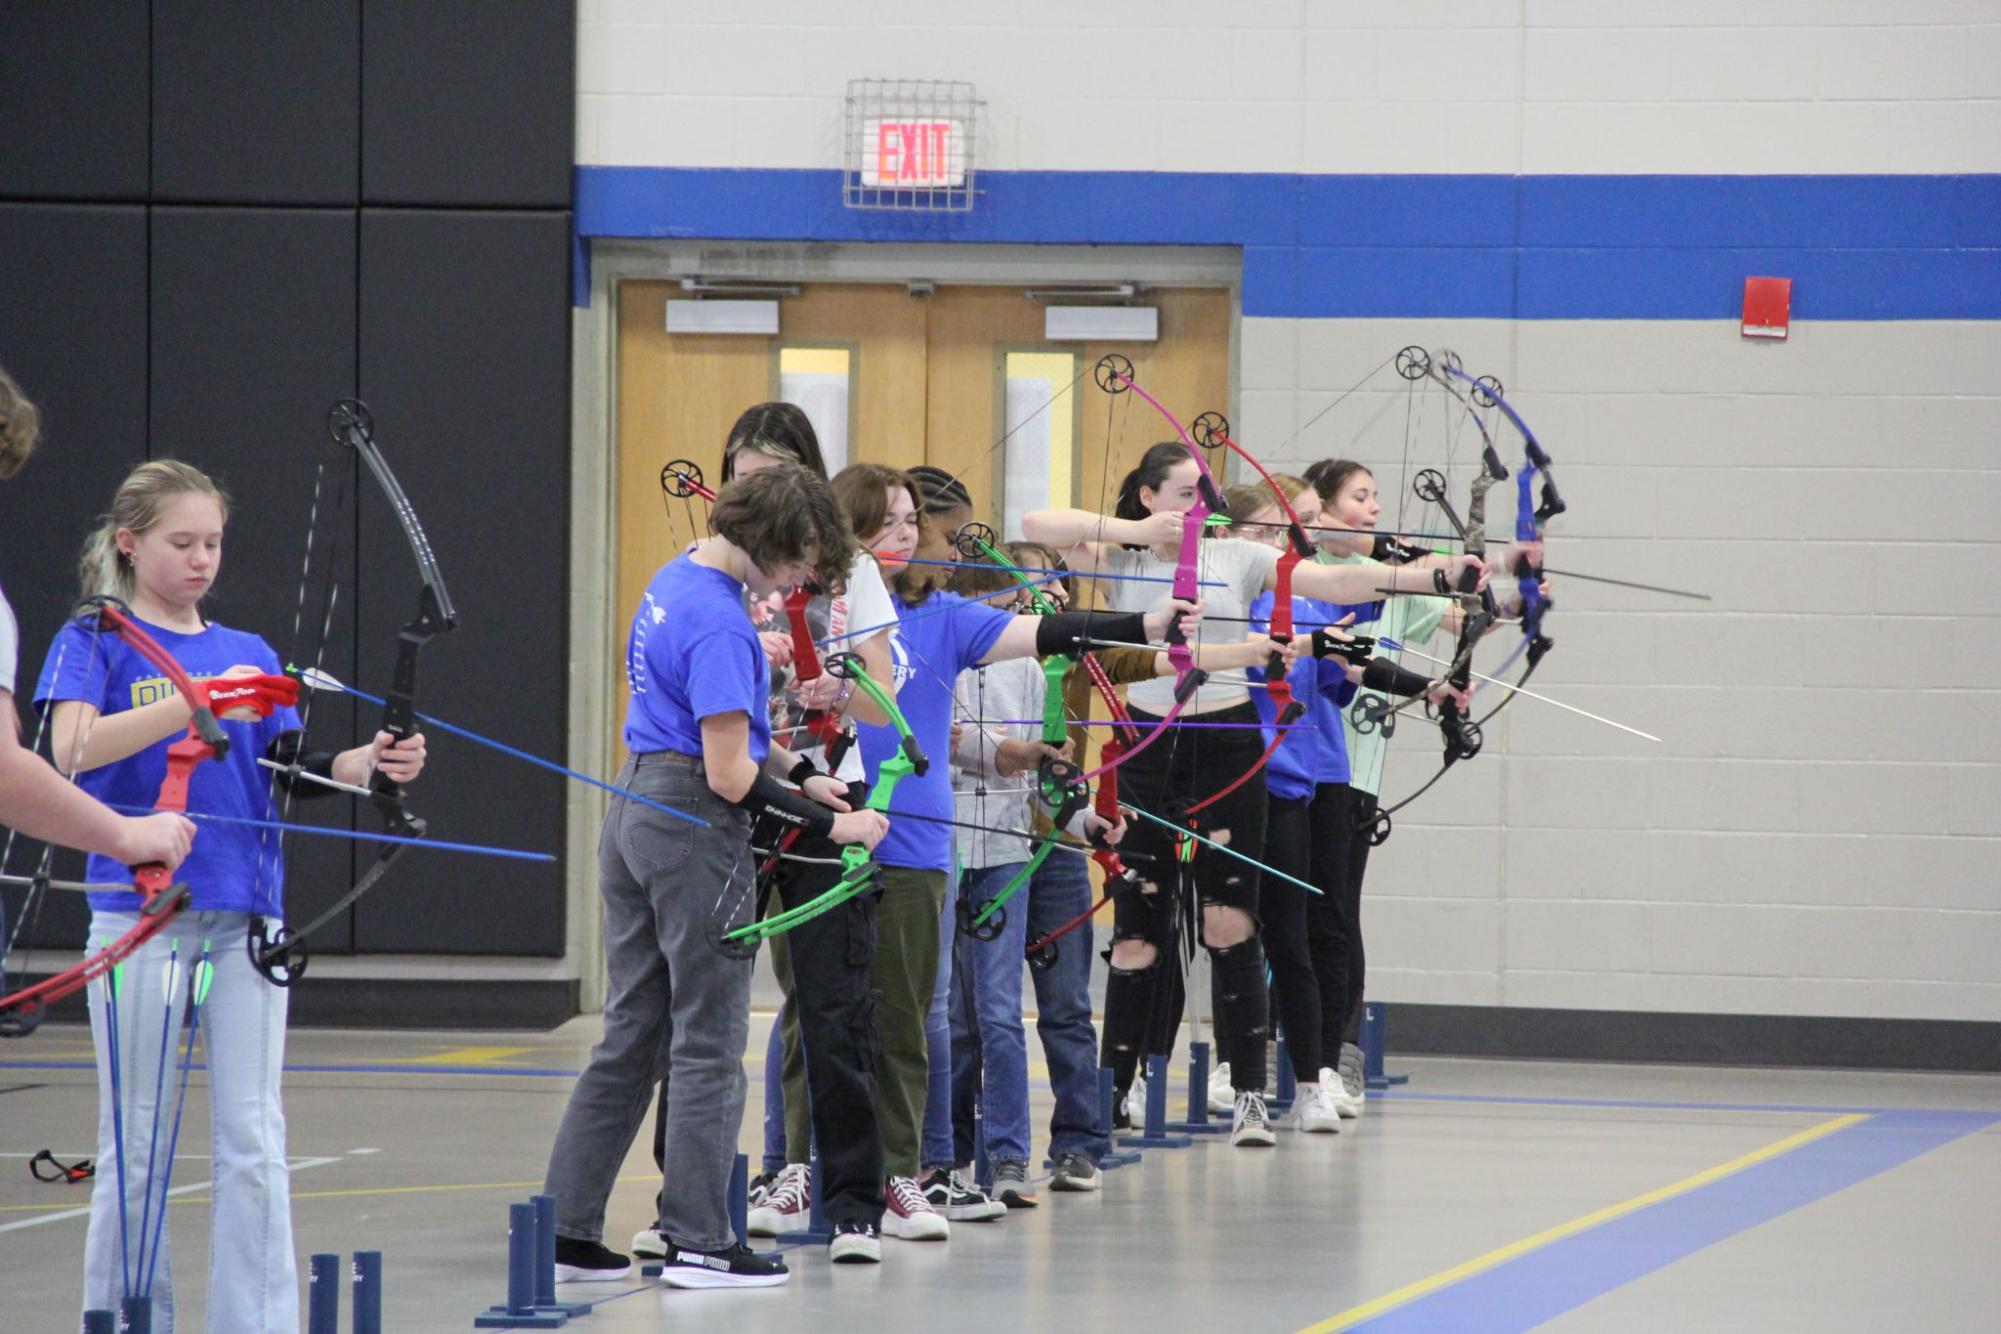 Lining up… Fairhope Archers prepare to shoot from the 10 meter line. The 
supervisor blew the whistle, and archers walked to collect scores.